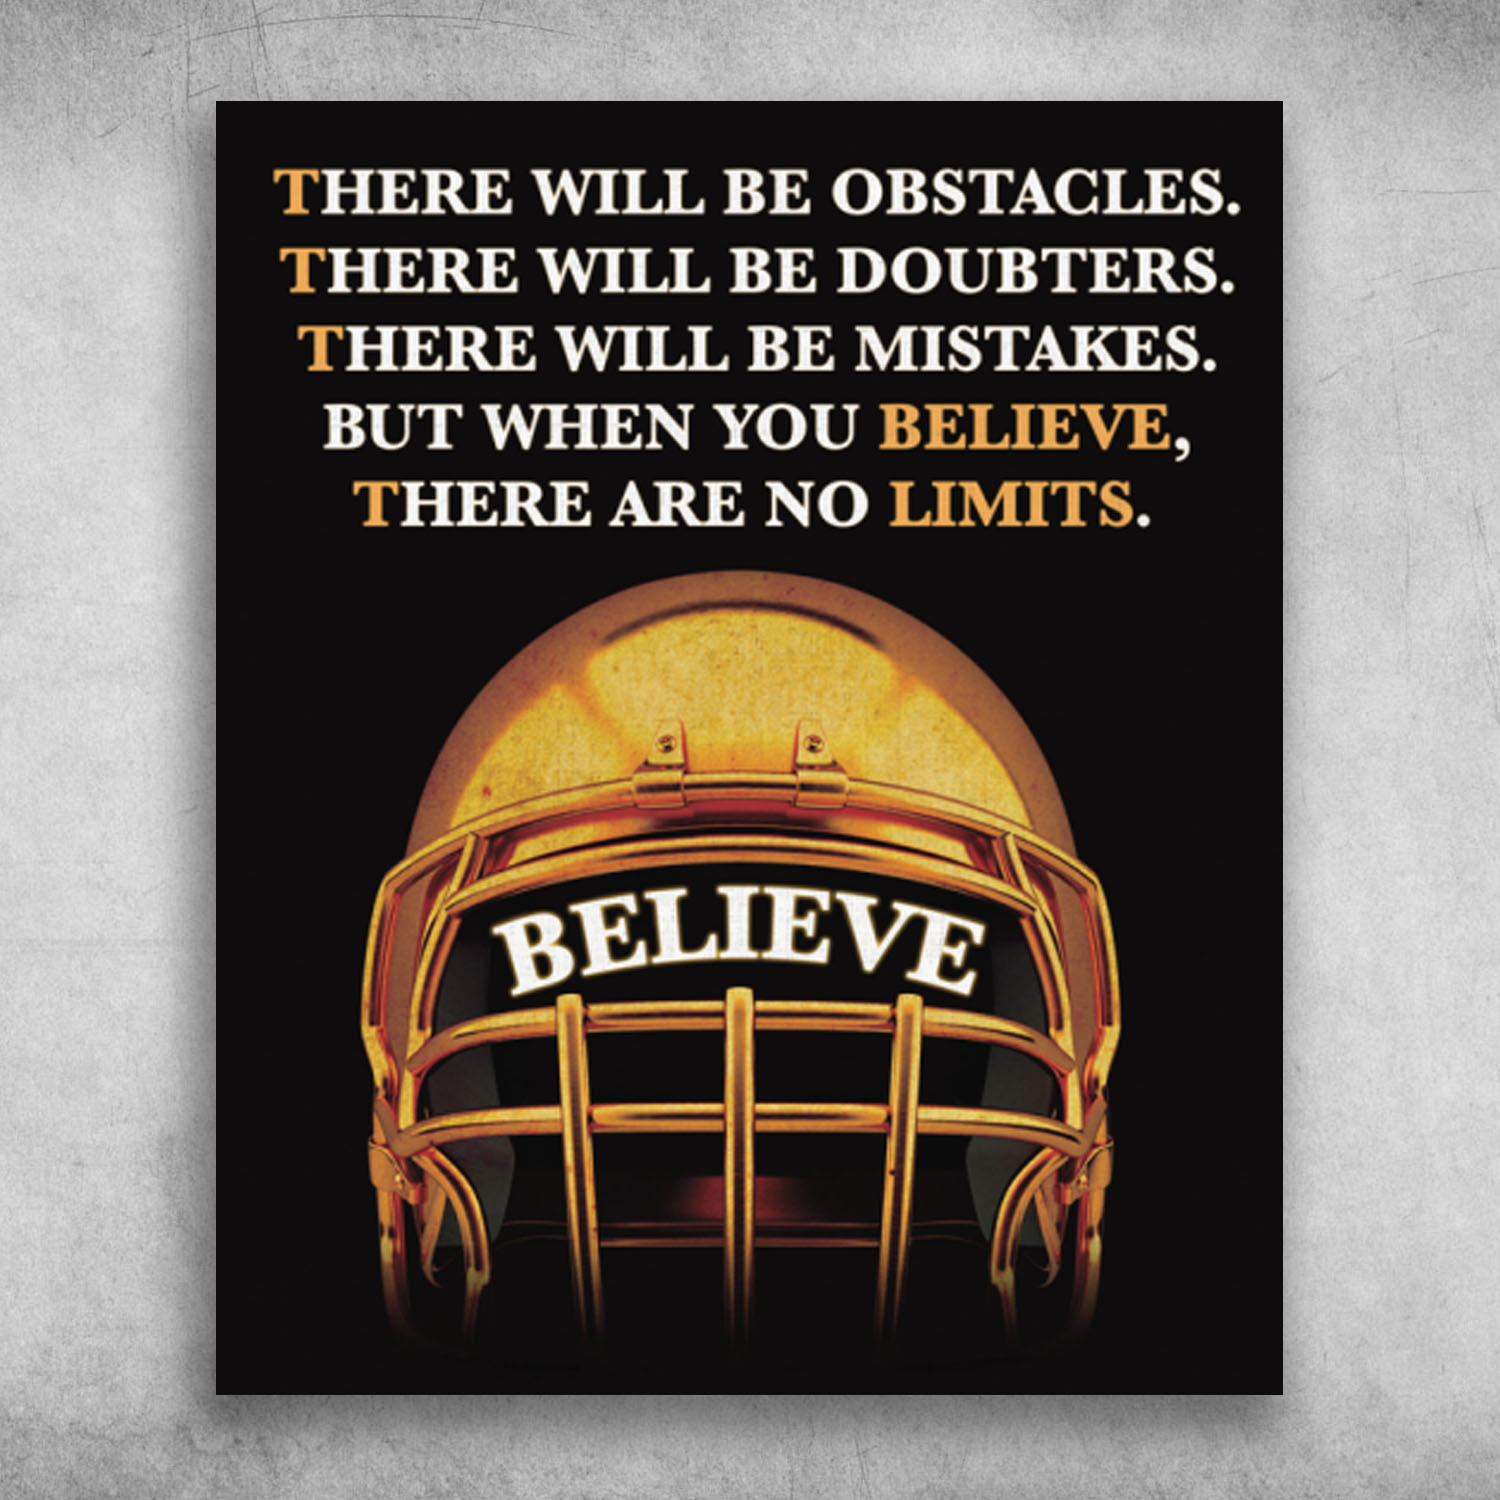 When You Believe There Are No Limits Gold American Football Helmet